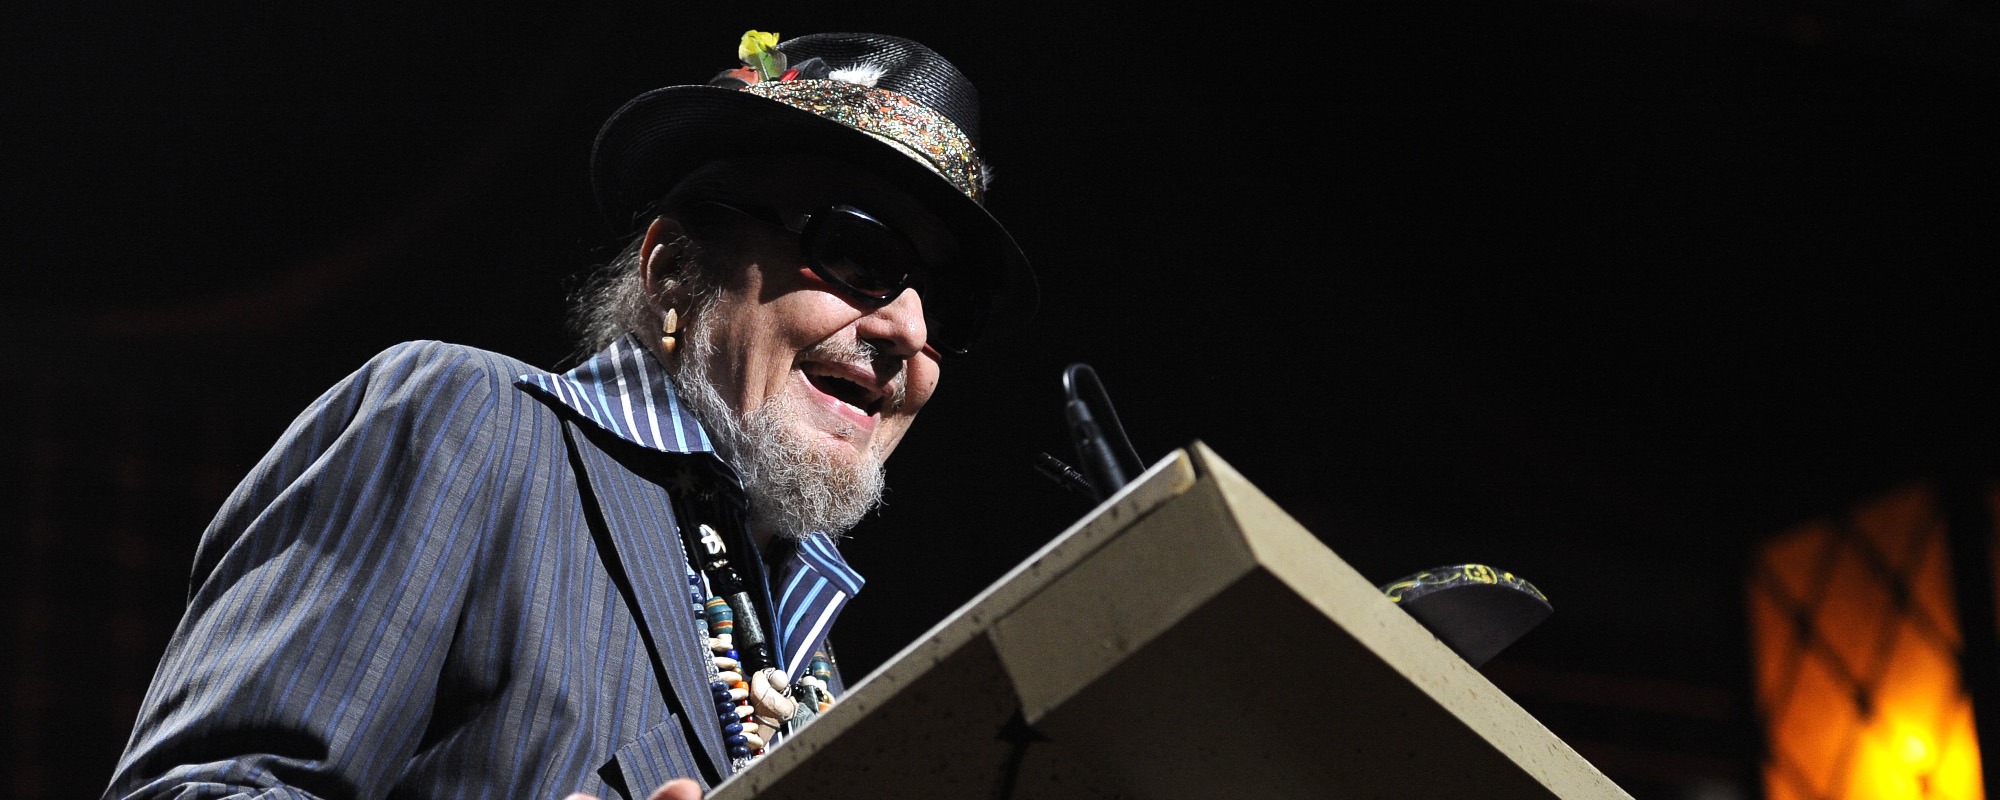 New Orleans Tribute Film and Soundtrack to Feature New Dr. John Song, Star-Studded Cast